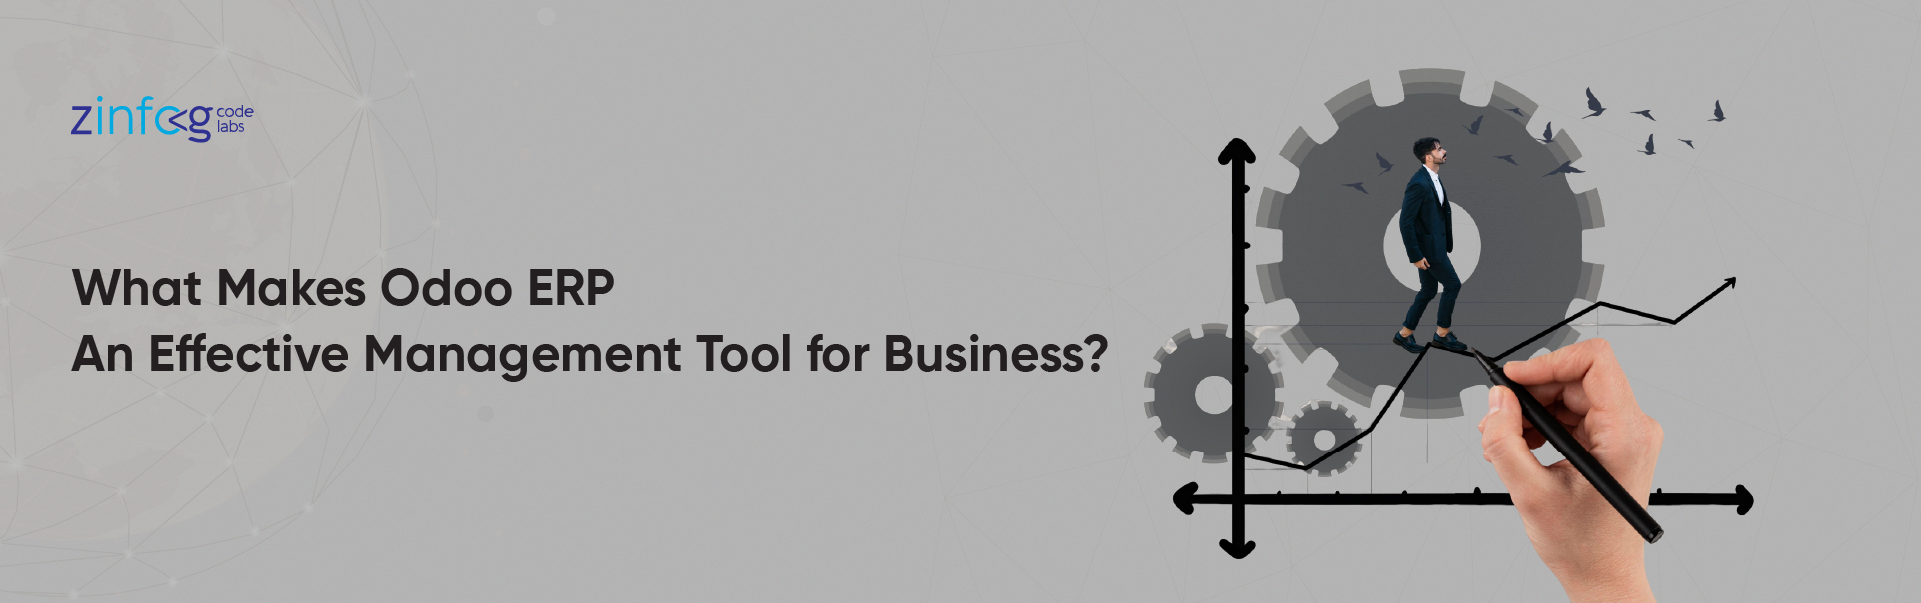 what-makes-odoo-erp-an-effective-management-tool-for-business.html